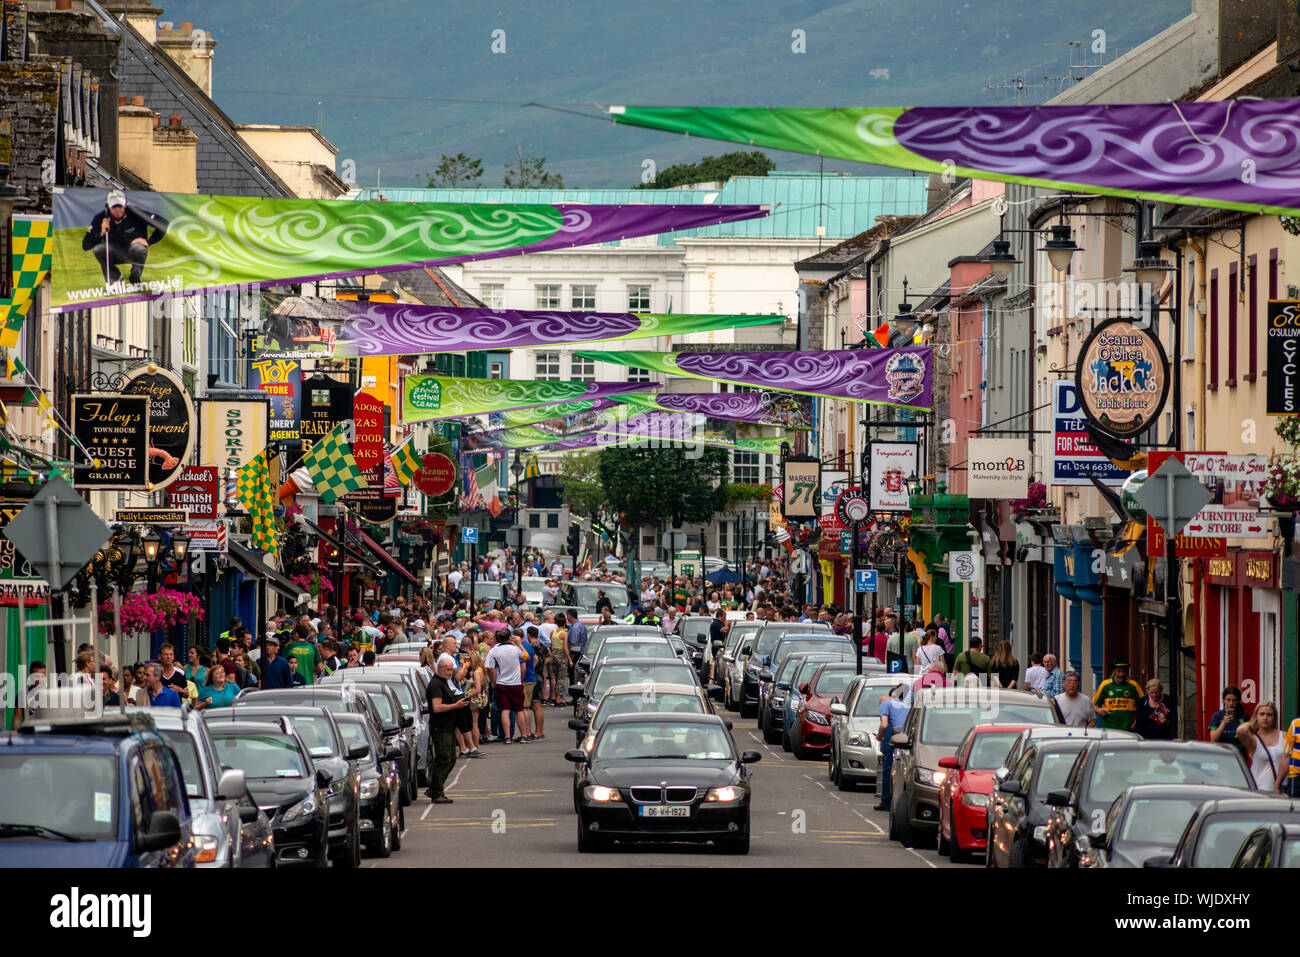 Killarney High Street packed with cars and people on a matchday in Killarney, County Kerry, Ireland Stock Photo